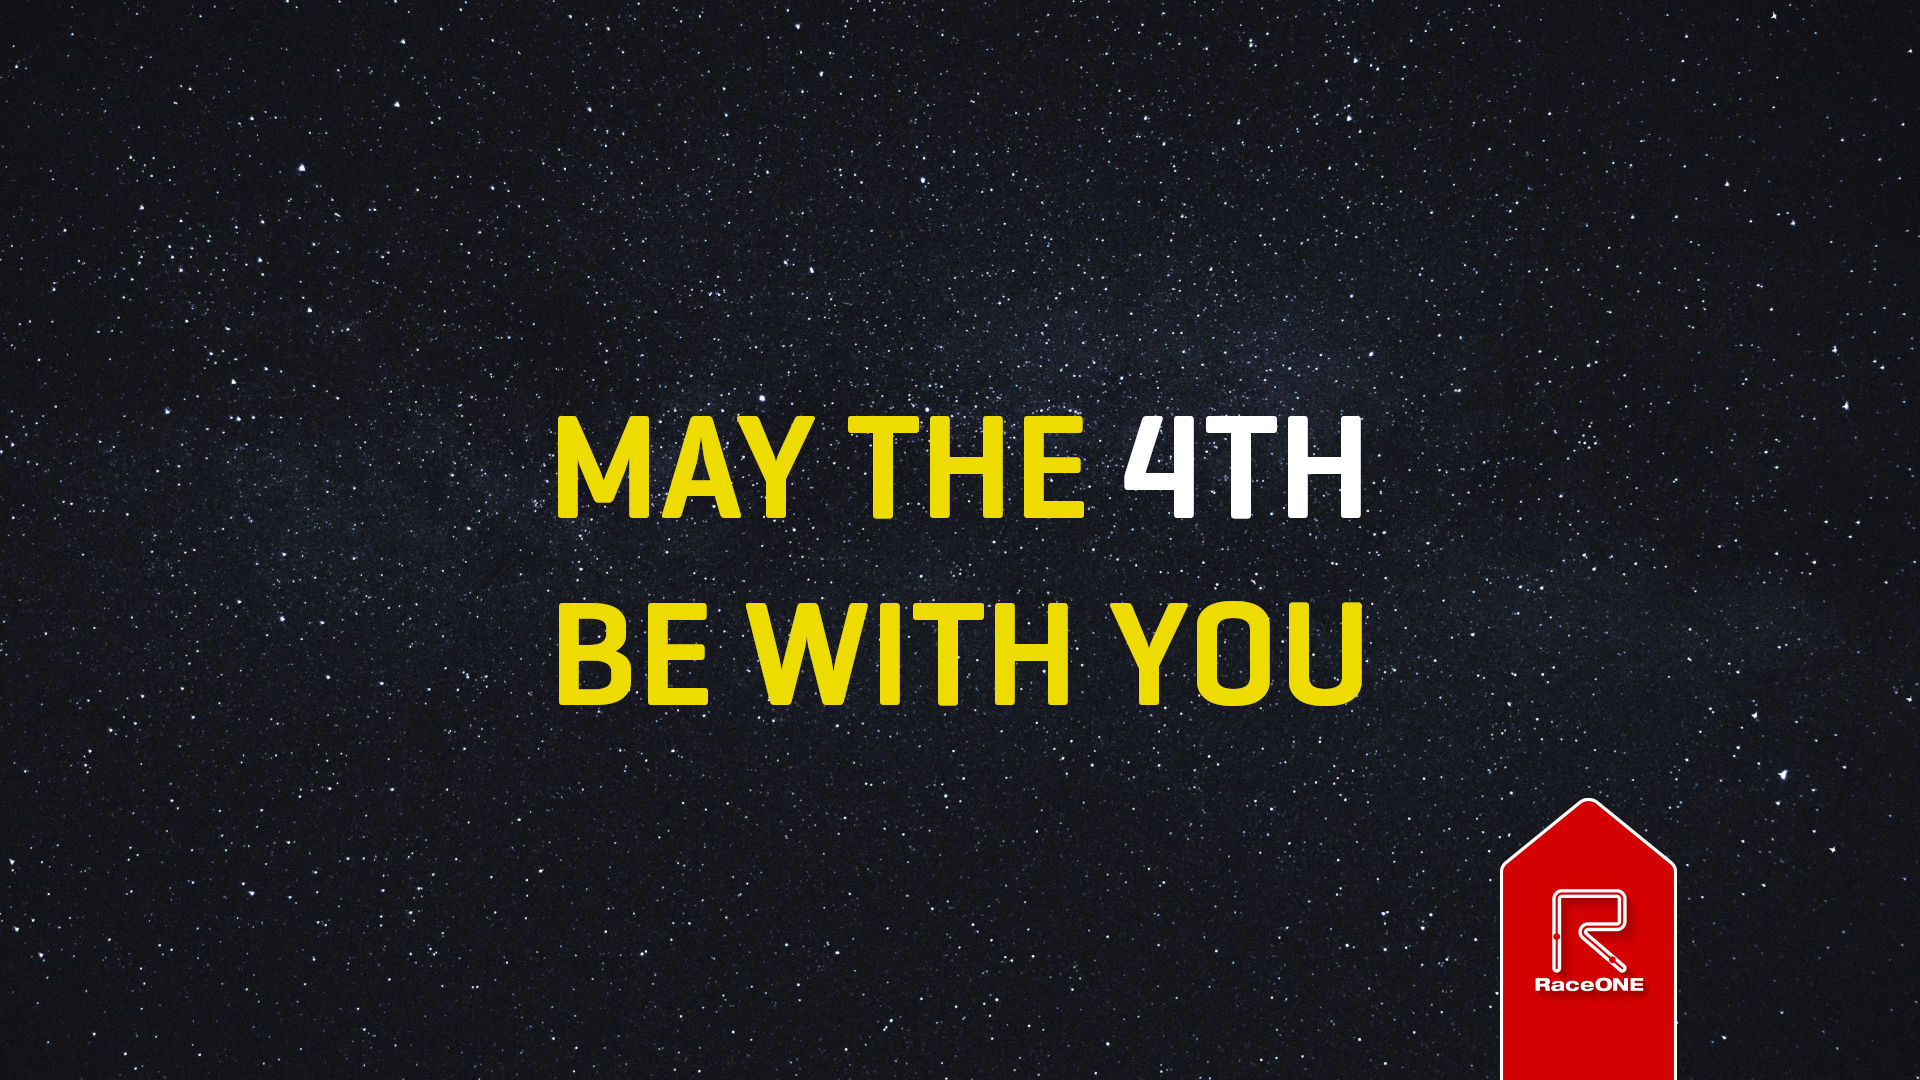 May the Fourth - 5 km